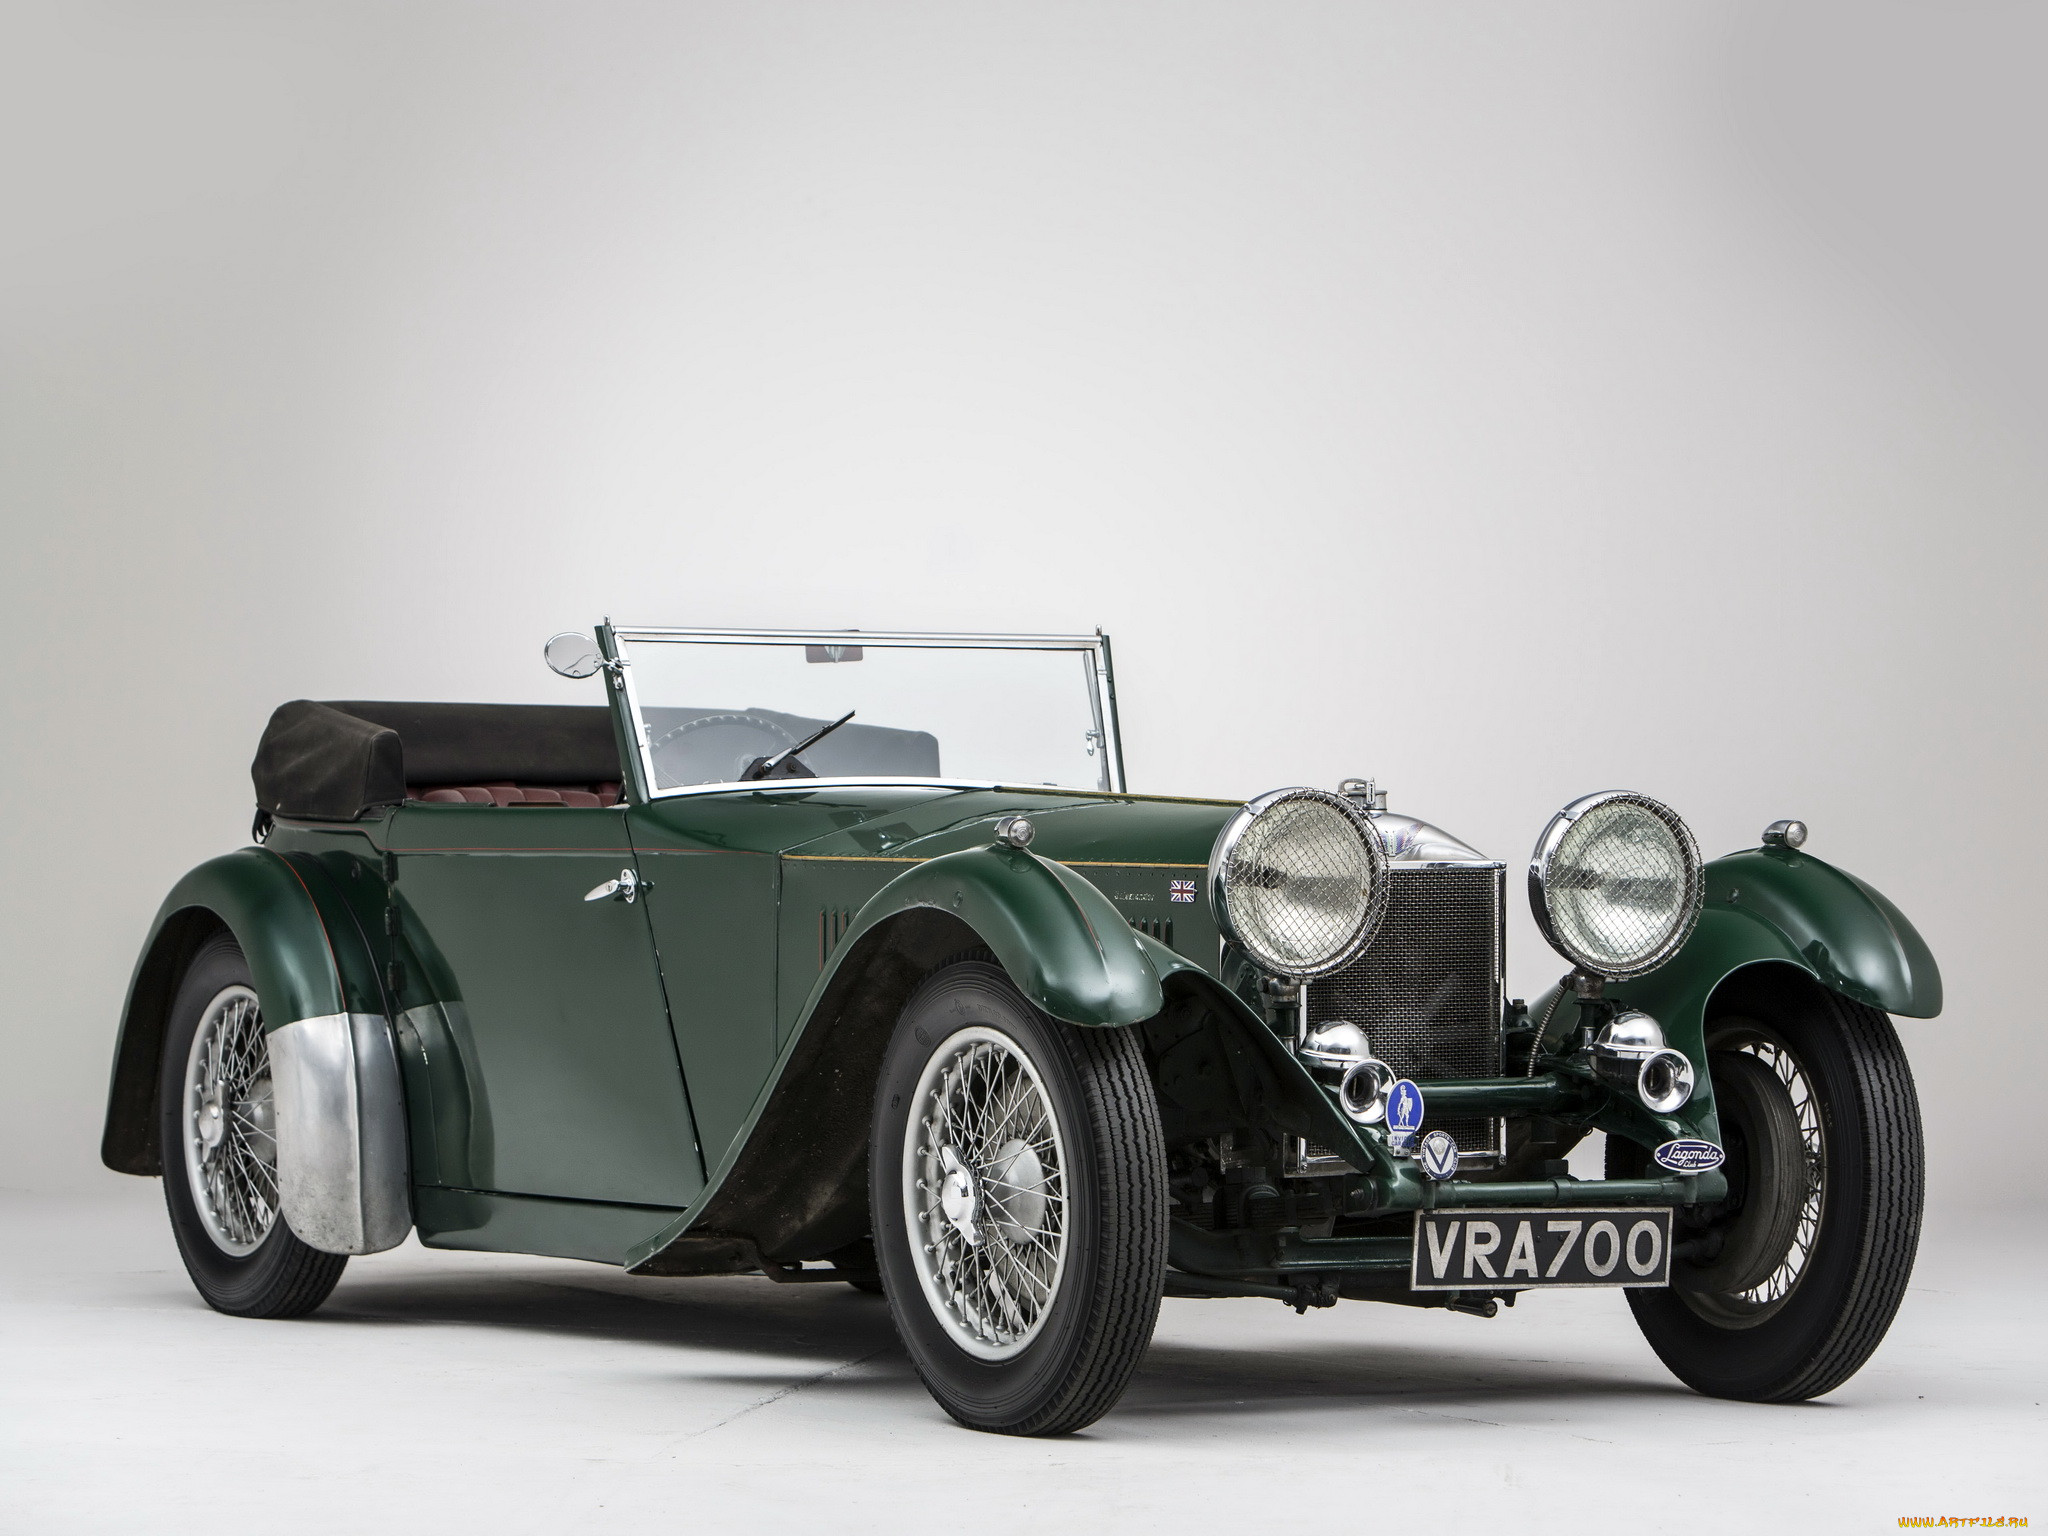 , , invicta, 4, -5, litre, s-type, low, chassis, drophead, coupe, corsica, s-31, 1930